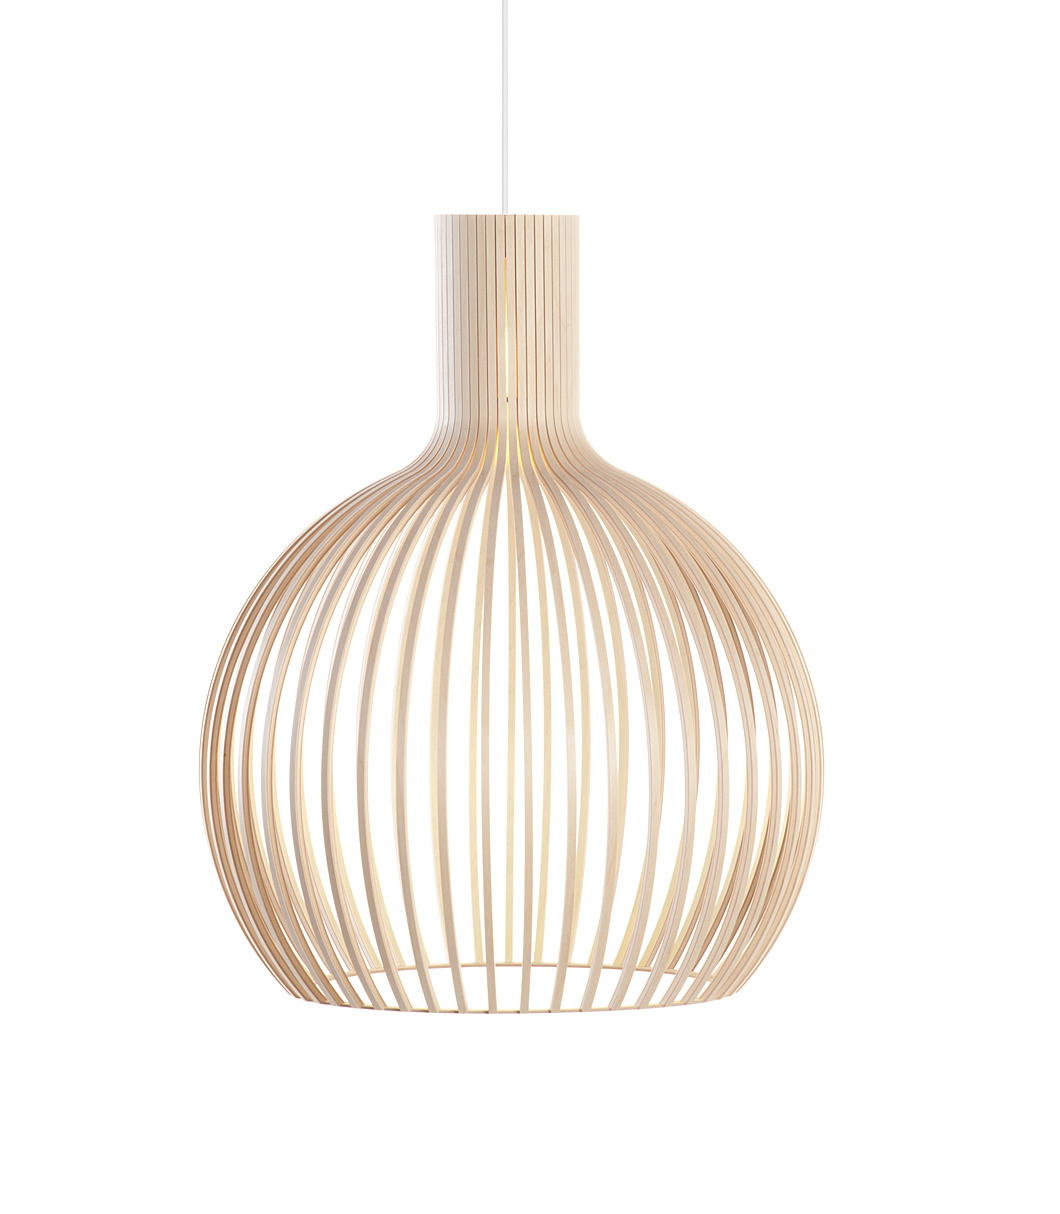 Octo 4240 pendant lamp is available in natural birch